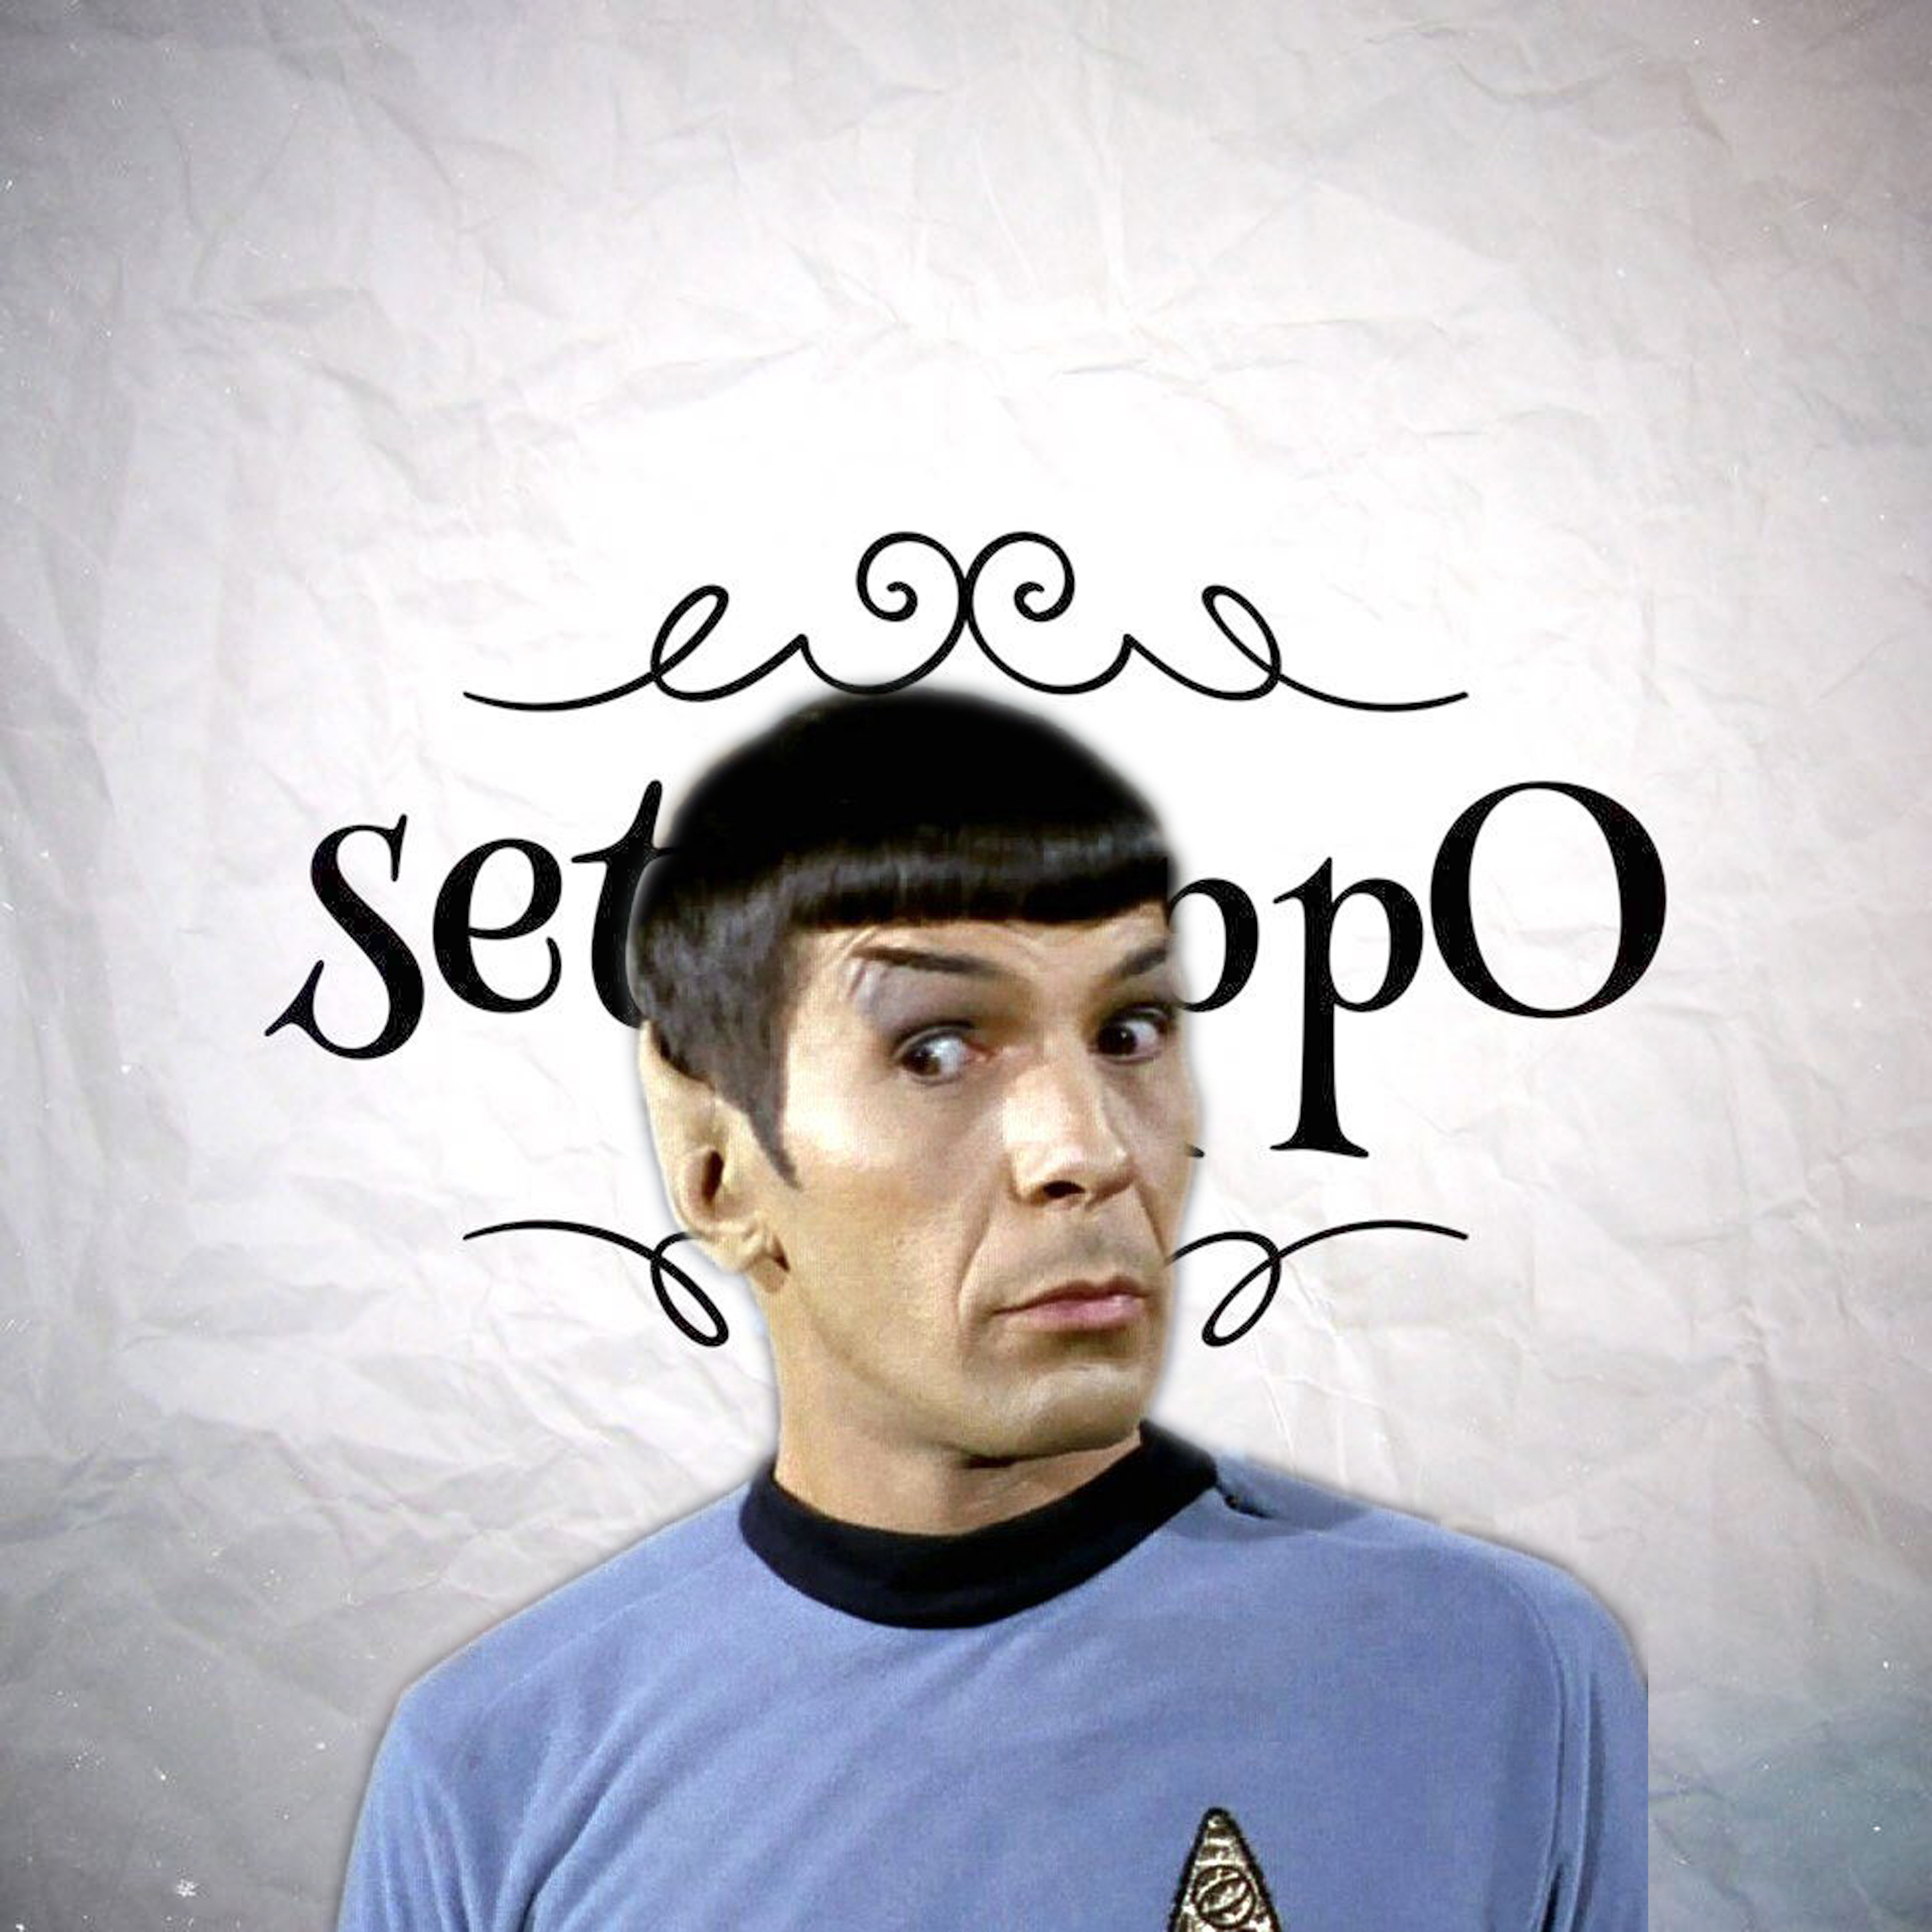 What’s The Opposite Of Mr Spock?